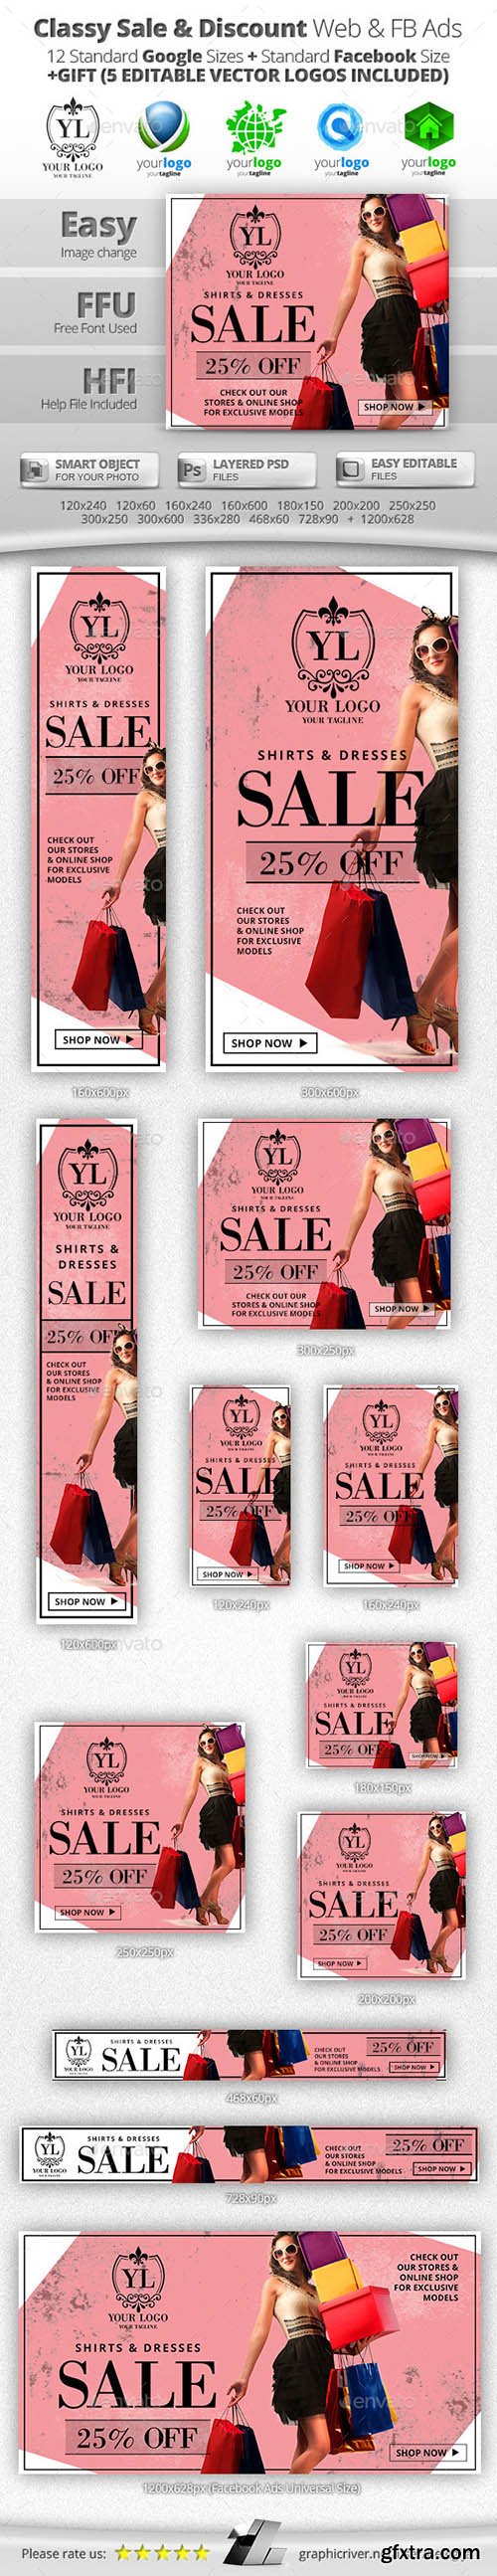 GraphicRiver Classy Sale & Discount Web & Facebook Banners 11406915